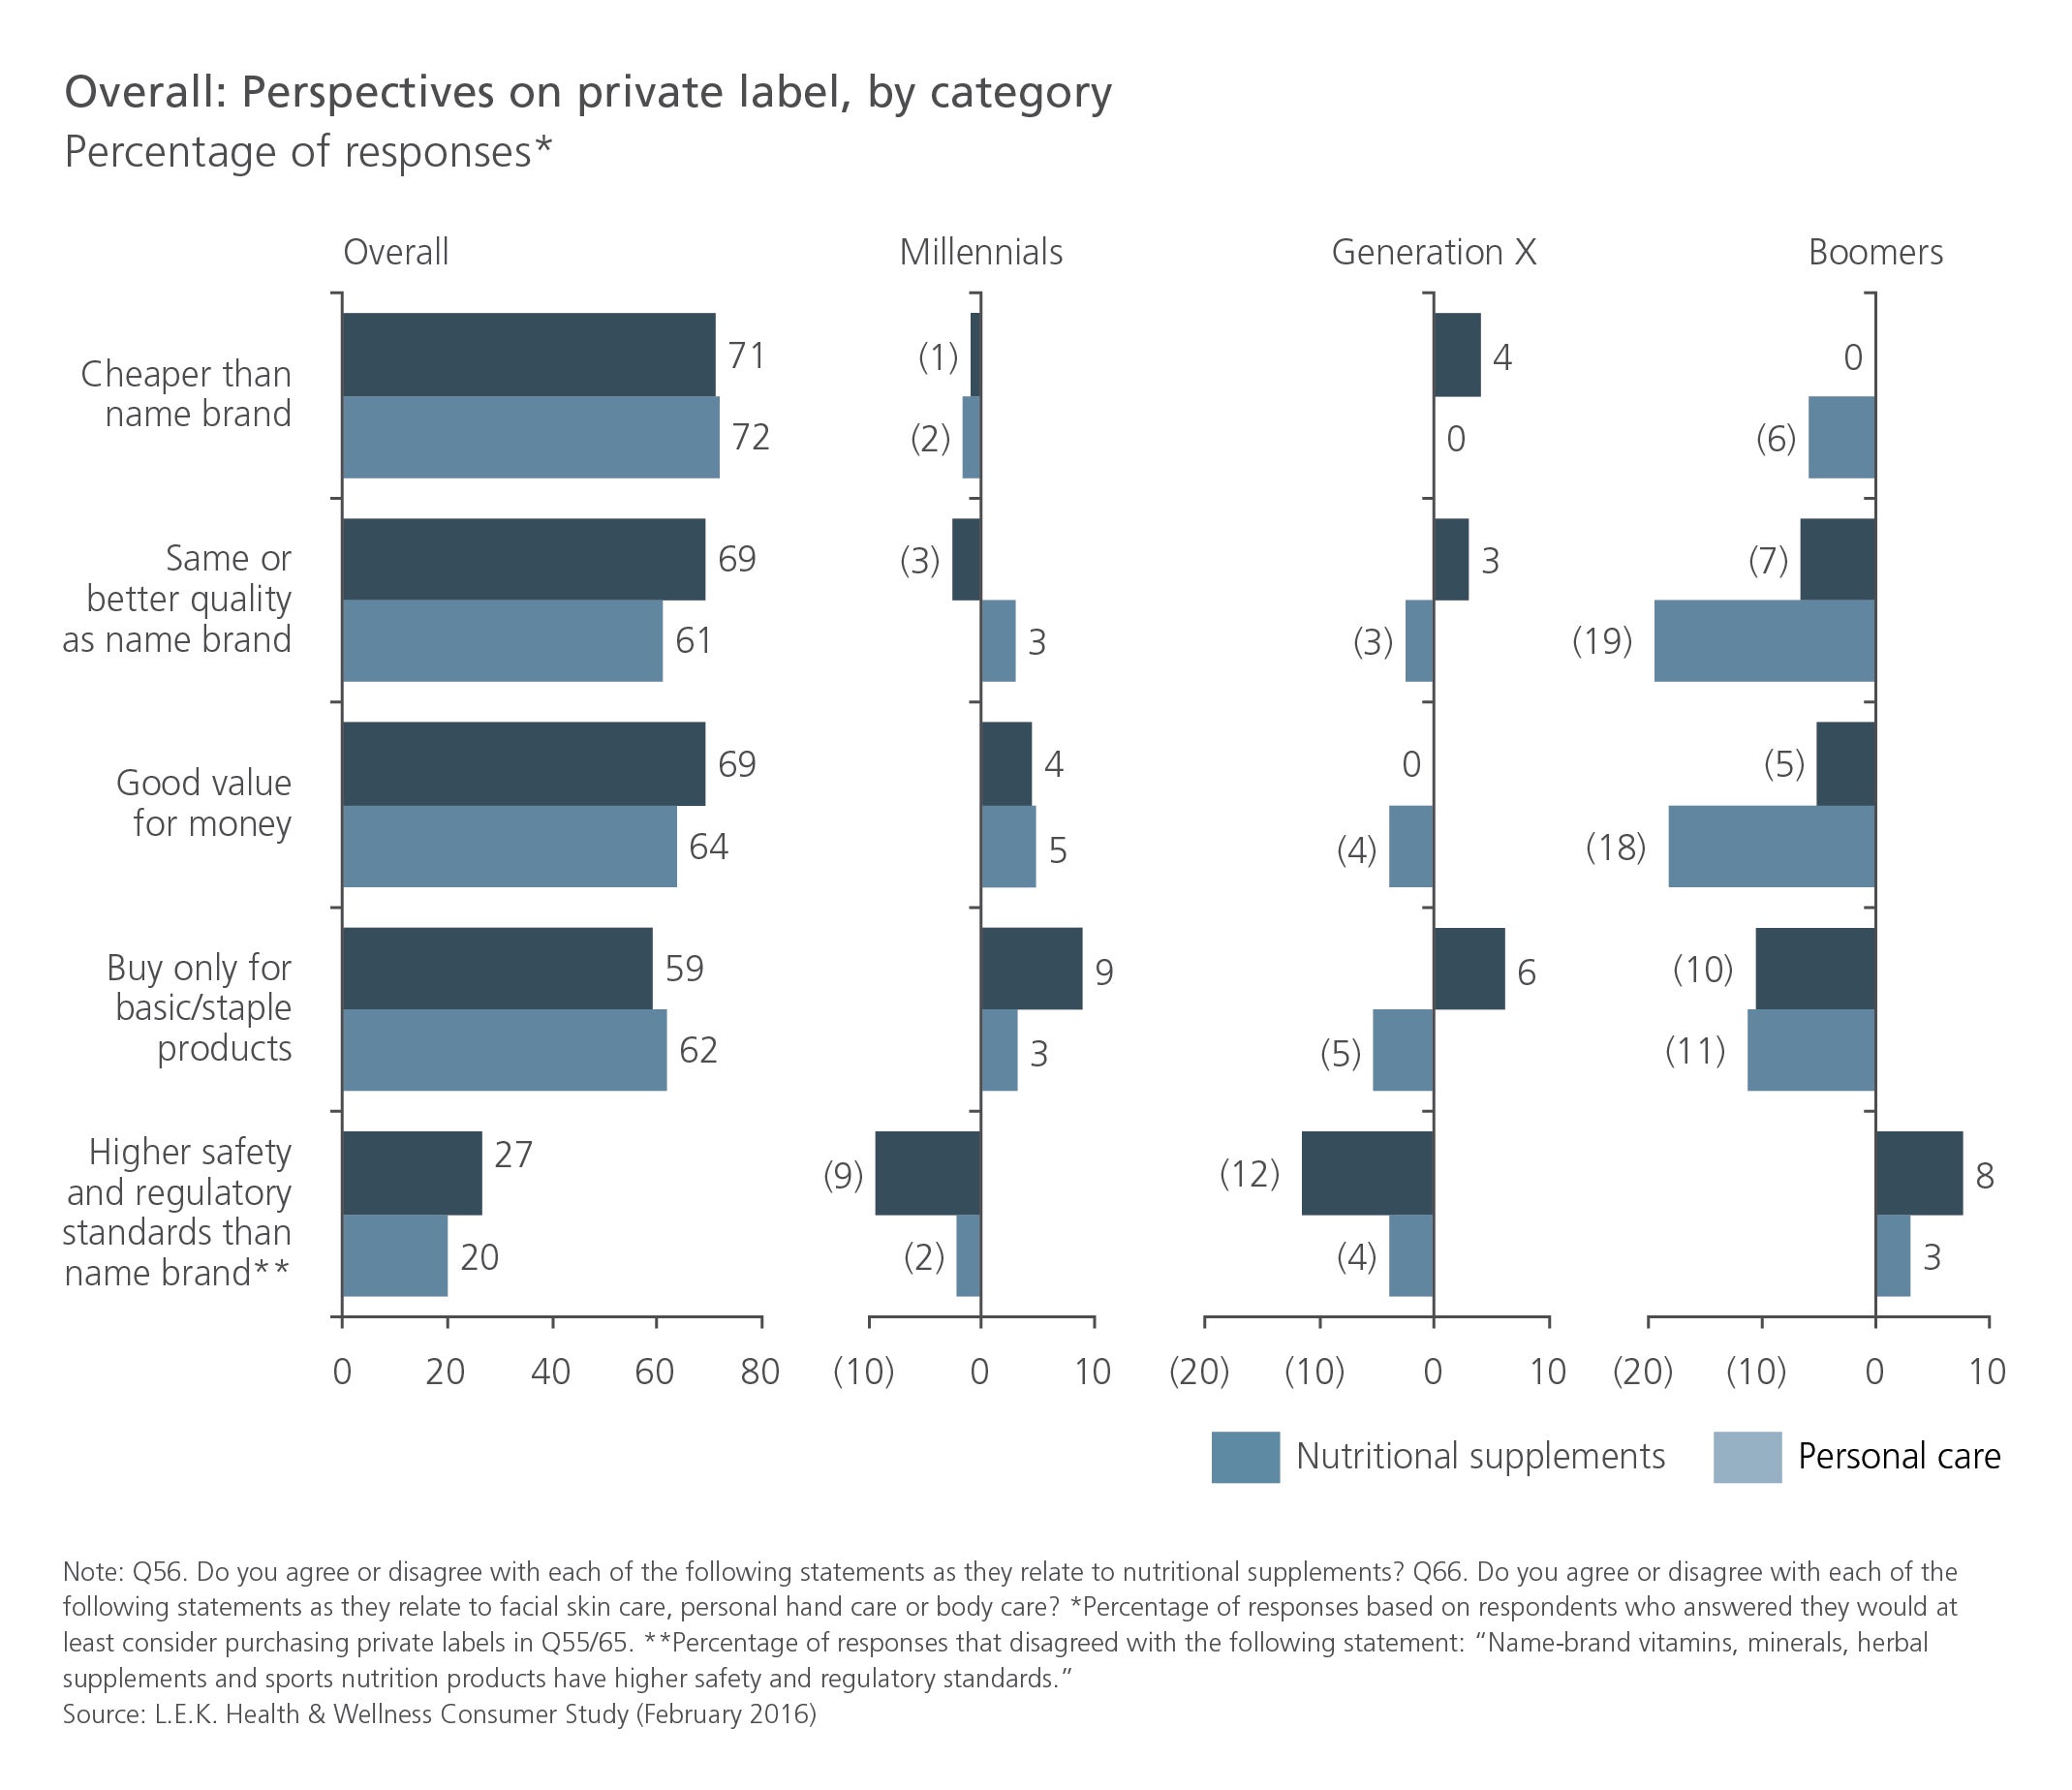 Overall: Perspectives on private label, by category